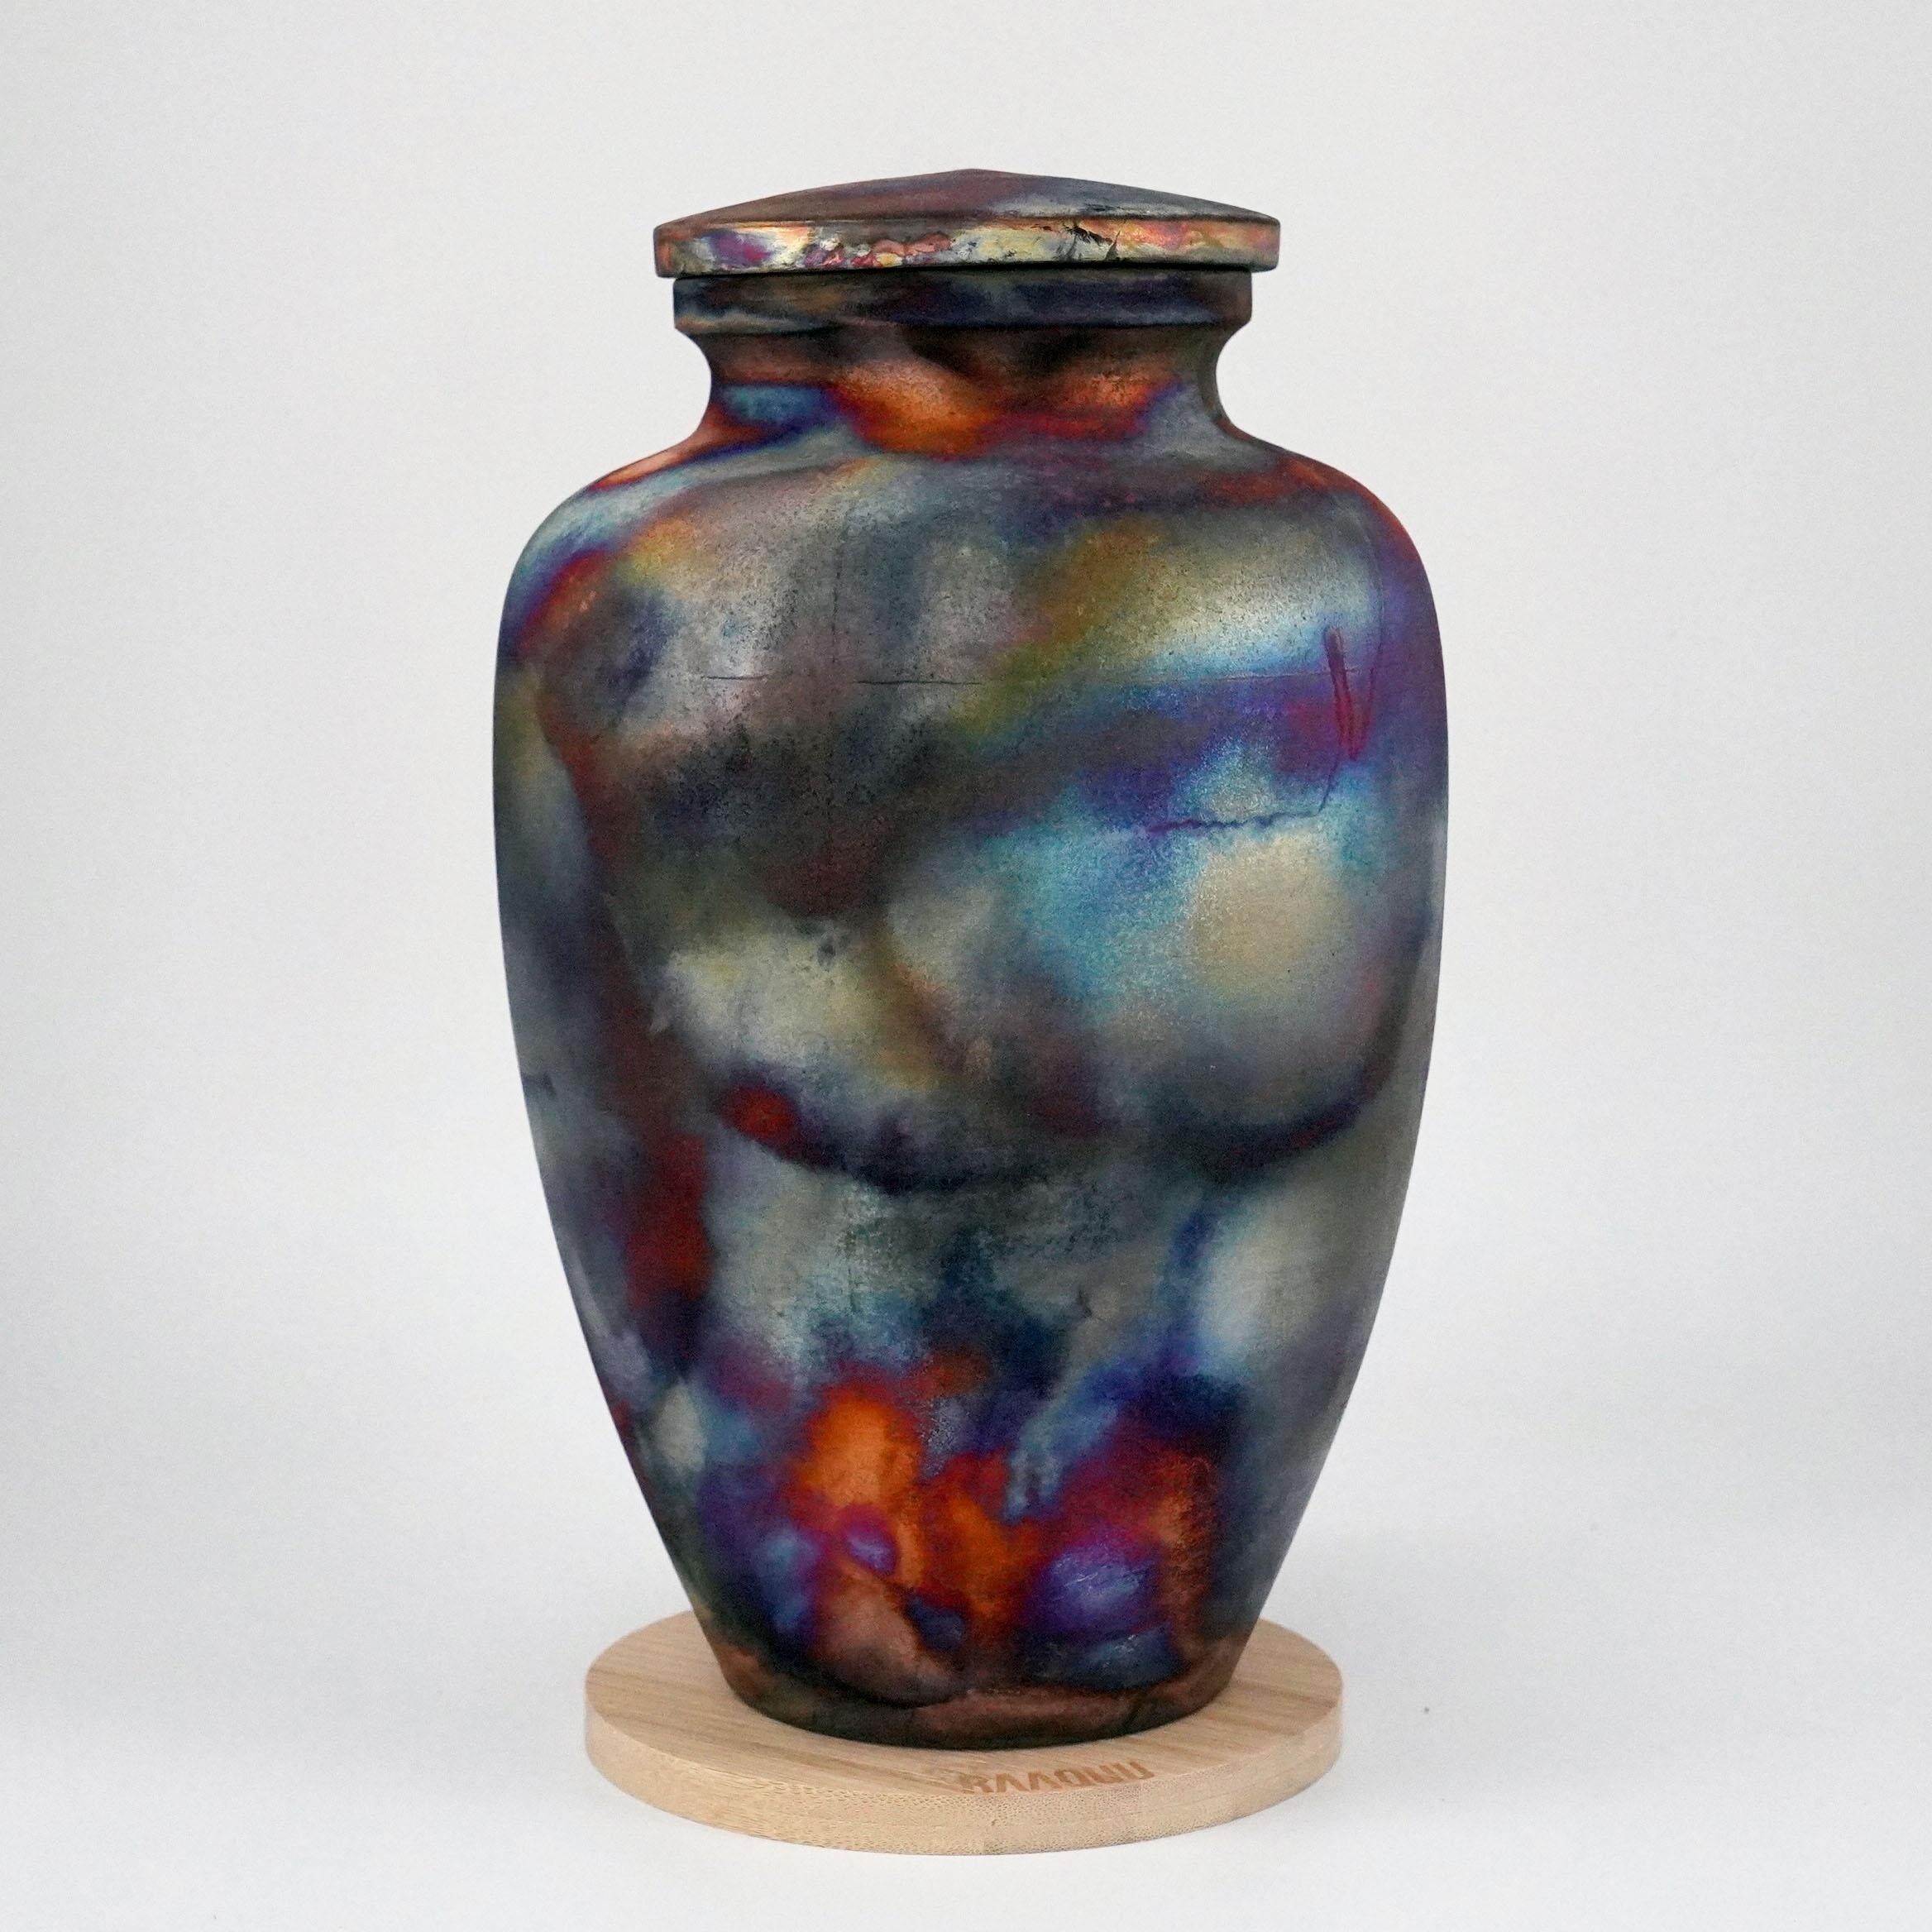 Omoide ~ (思い出) - Memories
 
The passing of a loved one will always be a defining moment in a person's life. The Omoide Urn is a one of a kind ceramic piece that offers a focal point to reminisce on the memories left behind by your loved one.
